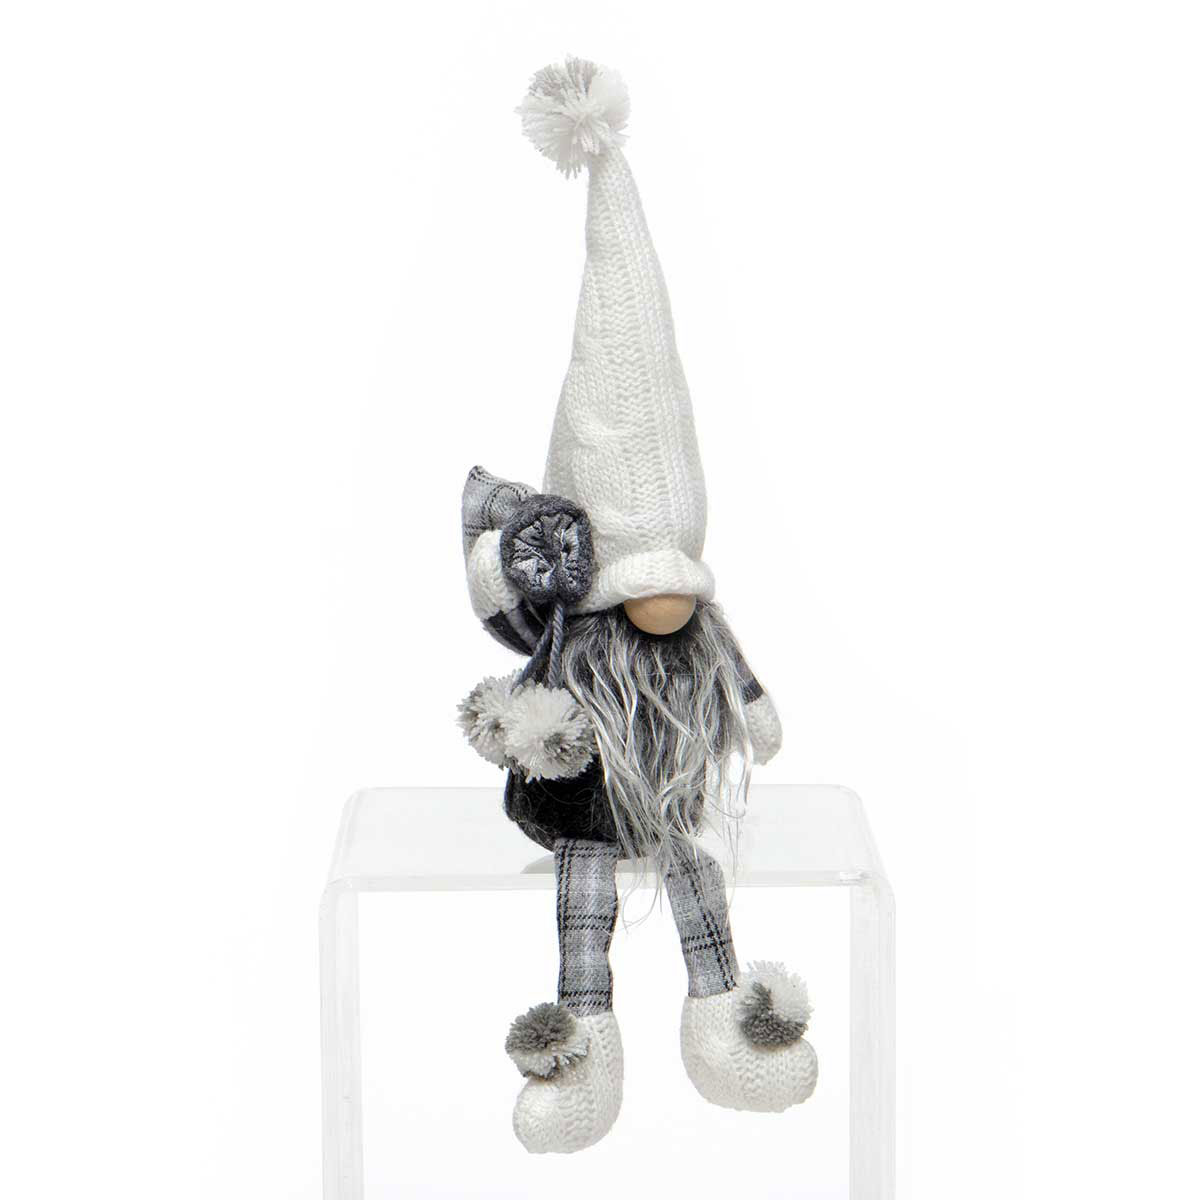 !POM-POM GNOME GREY/CREAM WITH PLAID BAG, WIRED CABLE KNIT